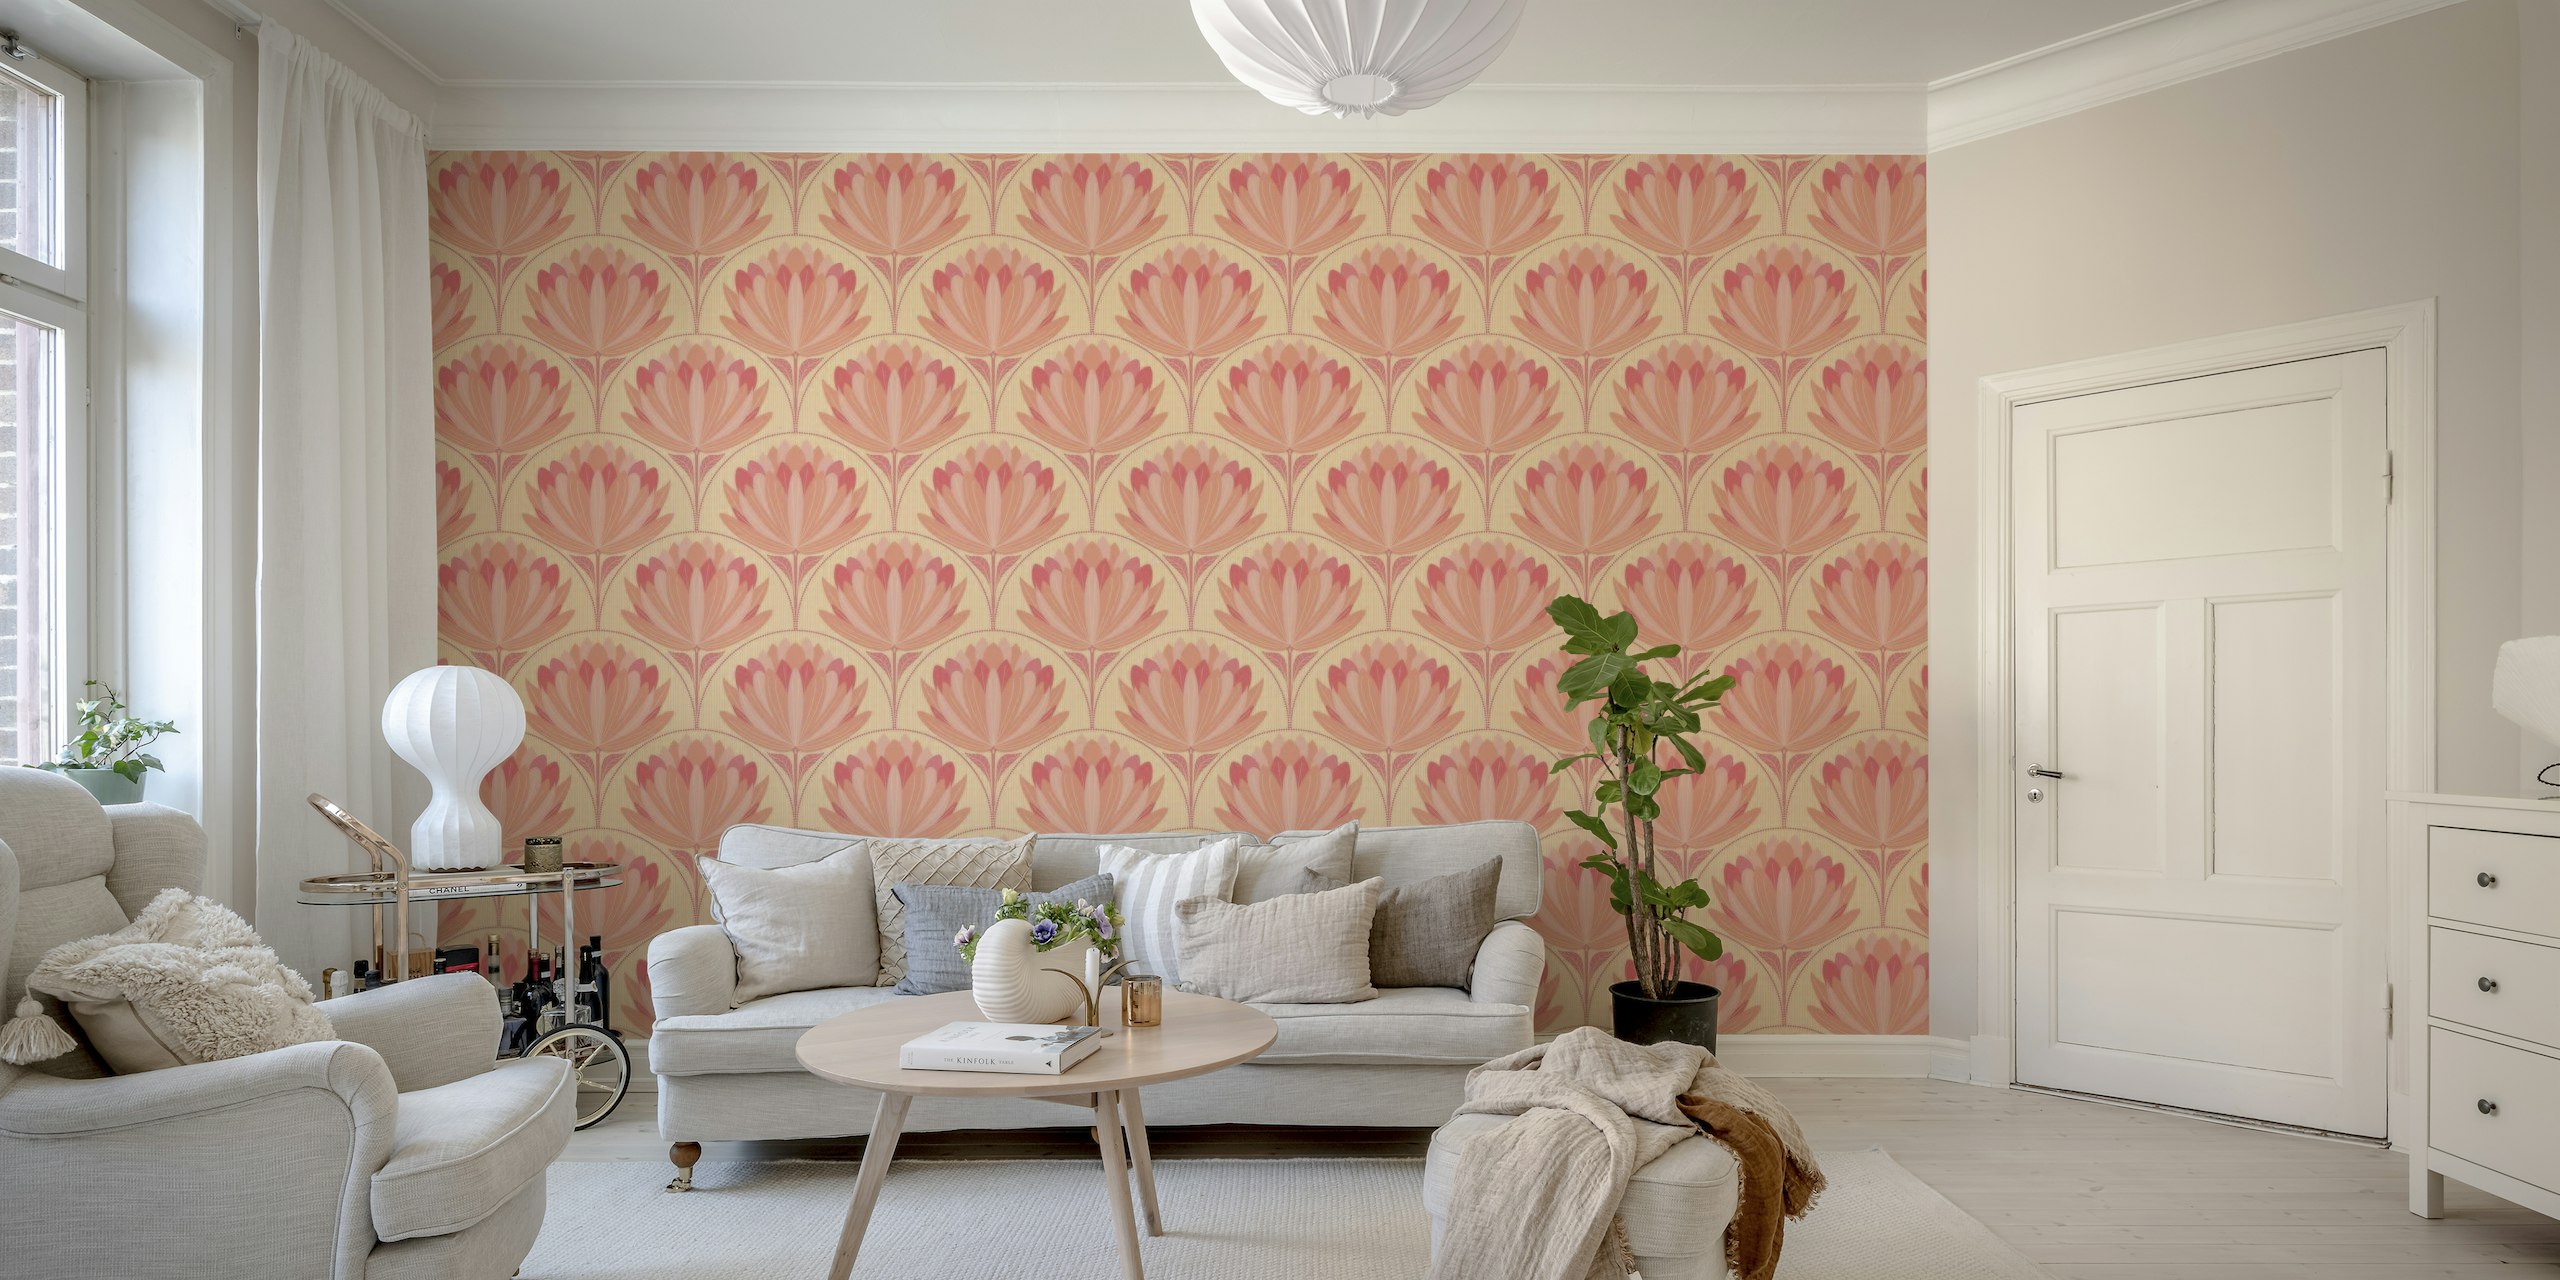 Peach Lotus wall mural with coral and peach-colored flowers on a subtle patterned background